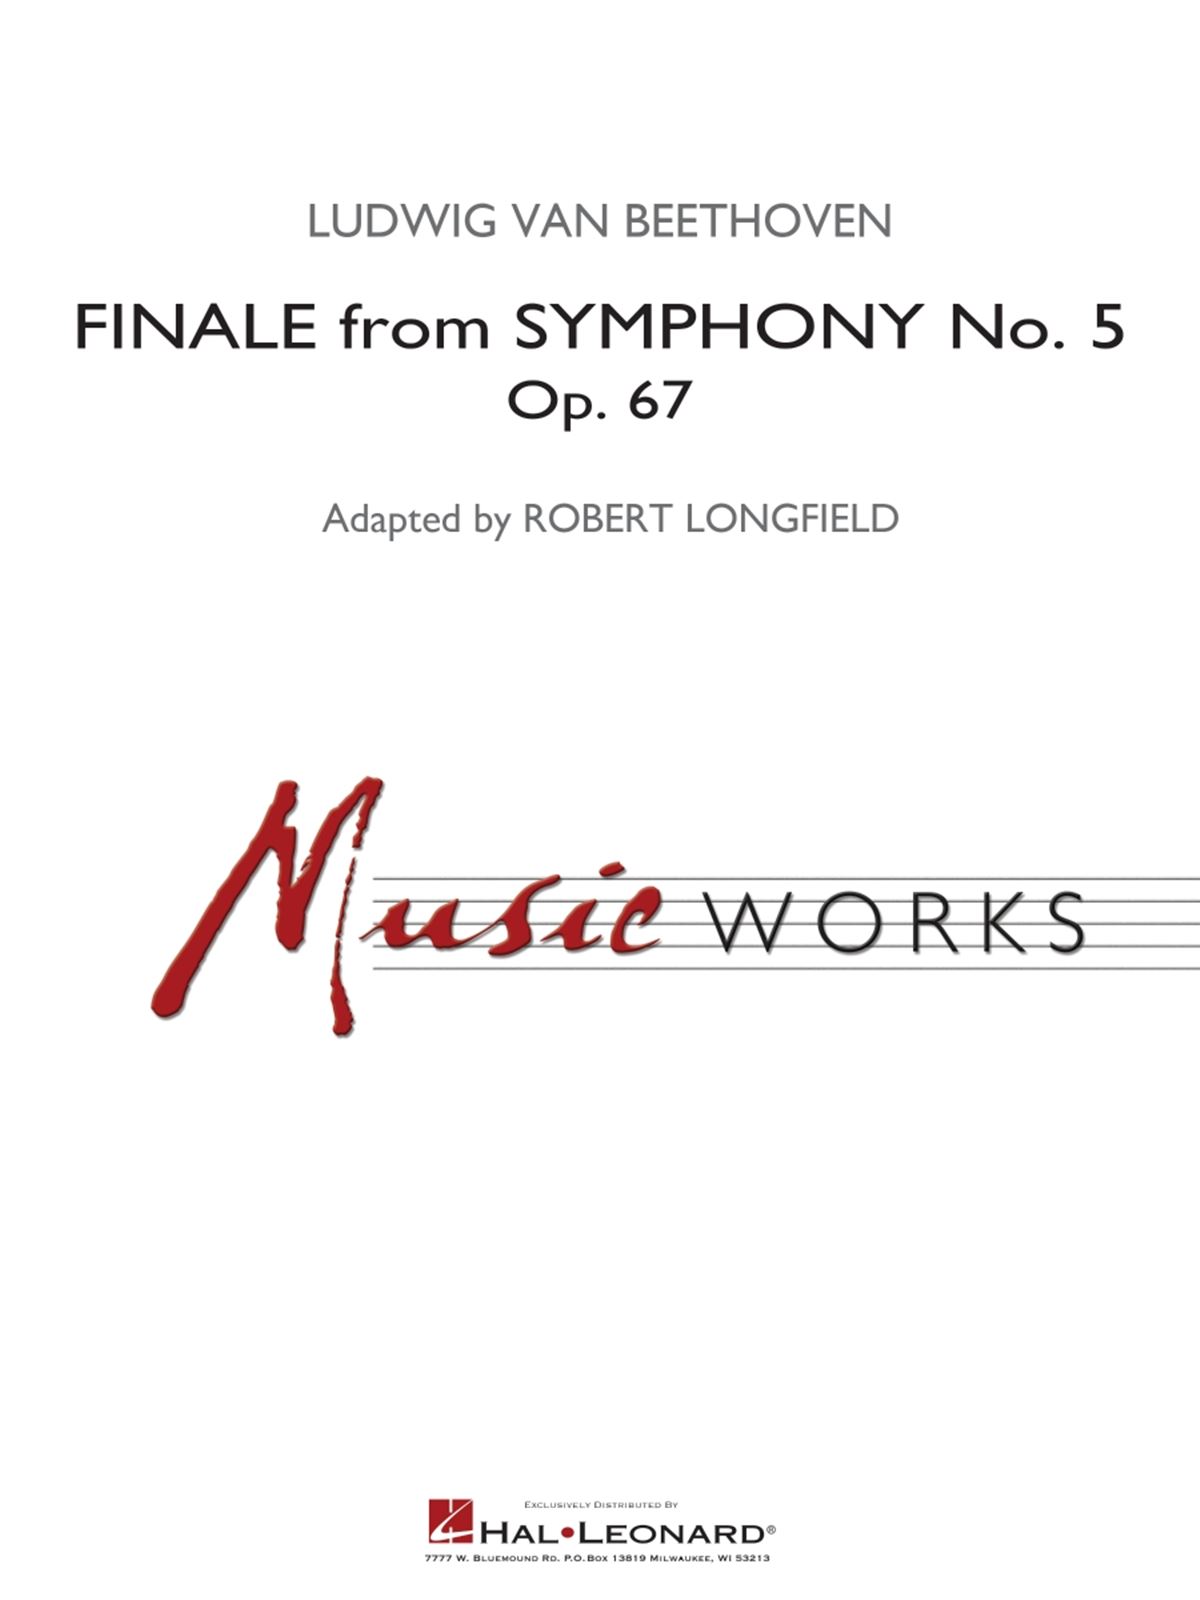 Ludwig van Beethoven: Finale from Symphony No. 5: Concert Band: Score and Parts